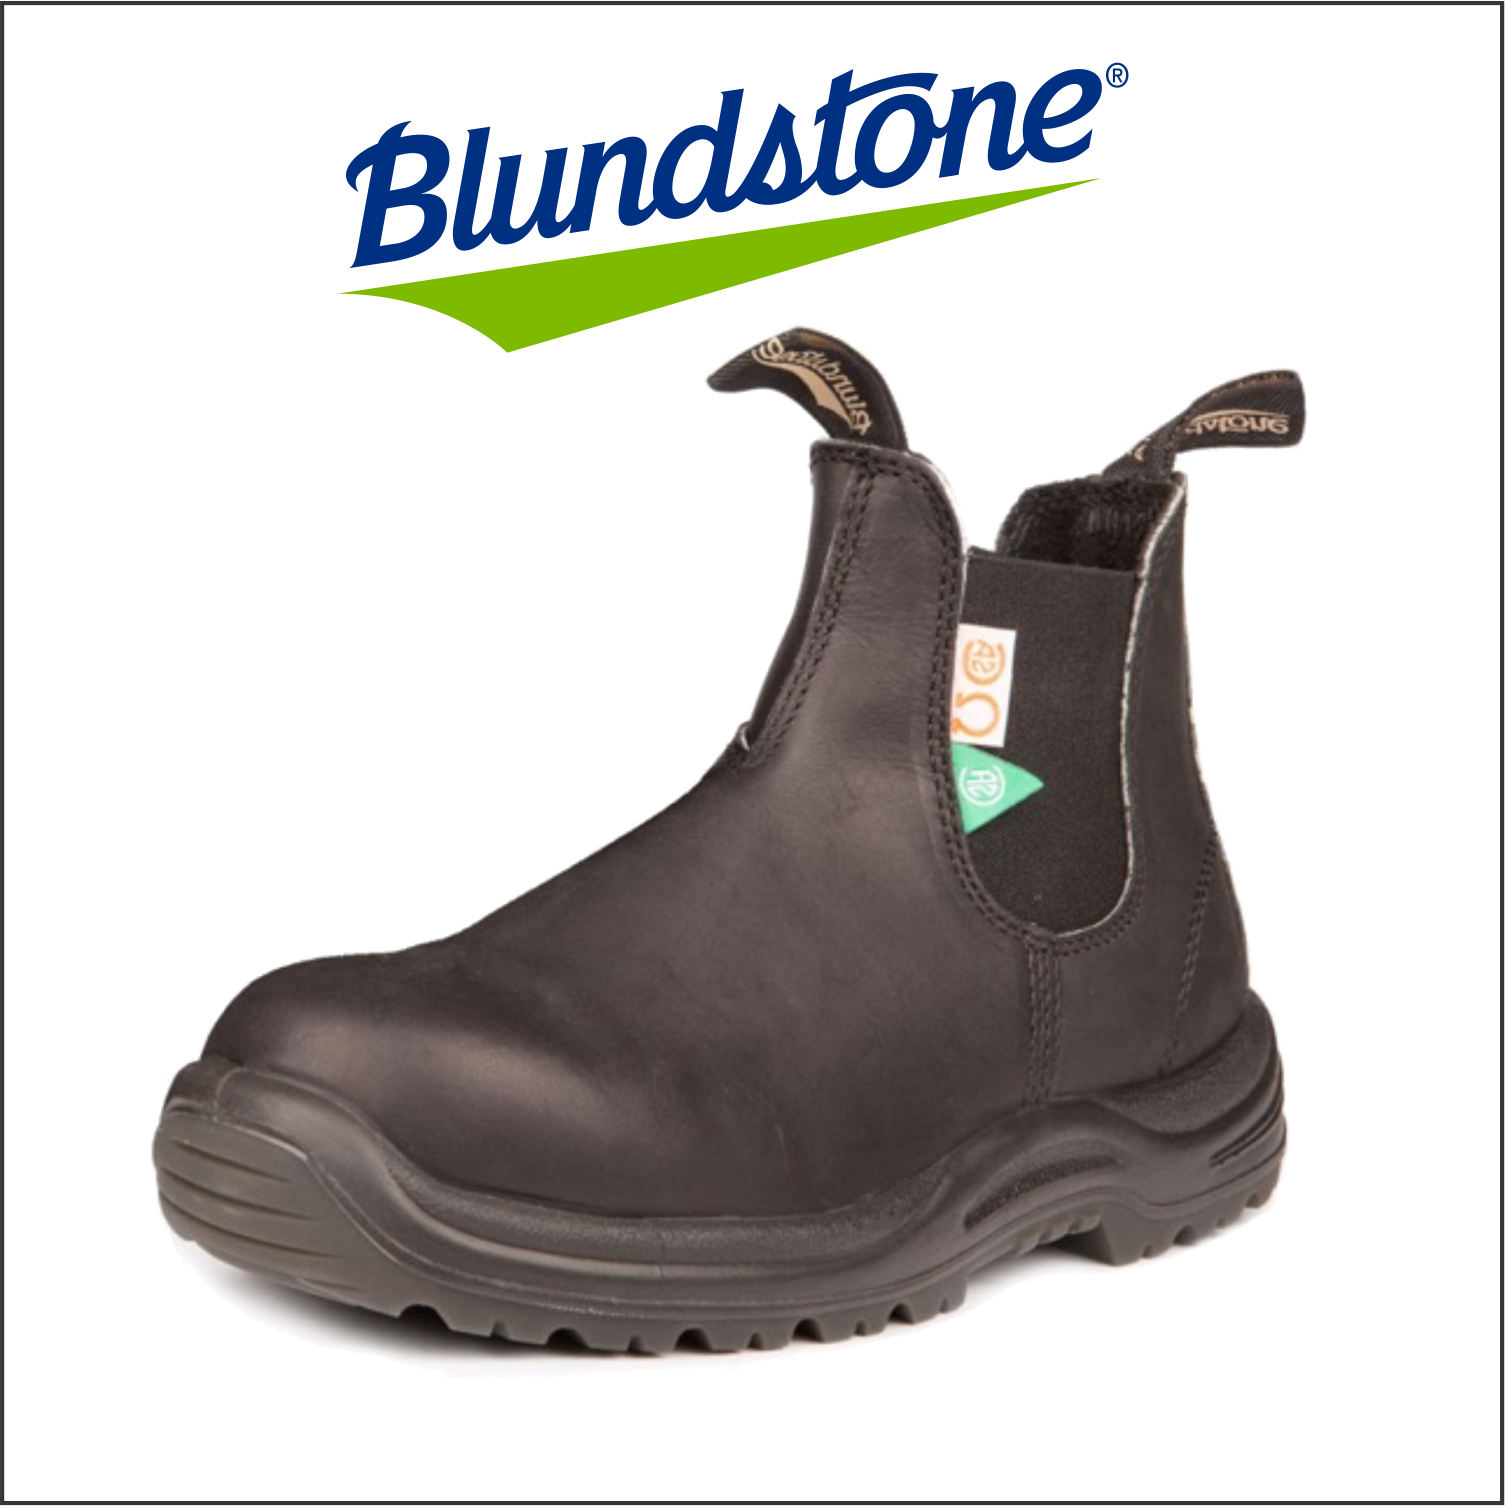 Blundstone.png